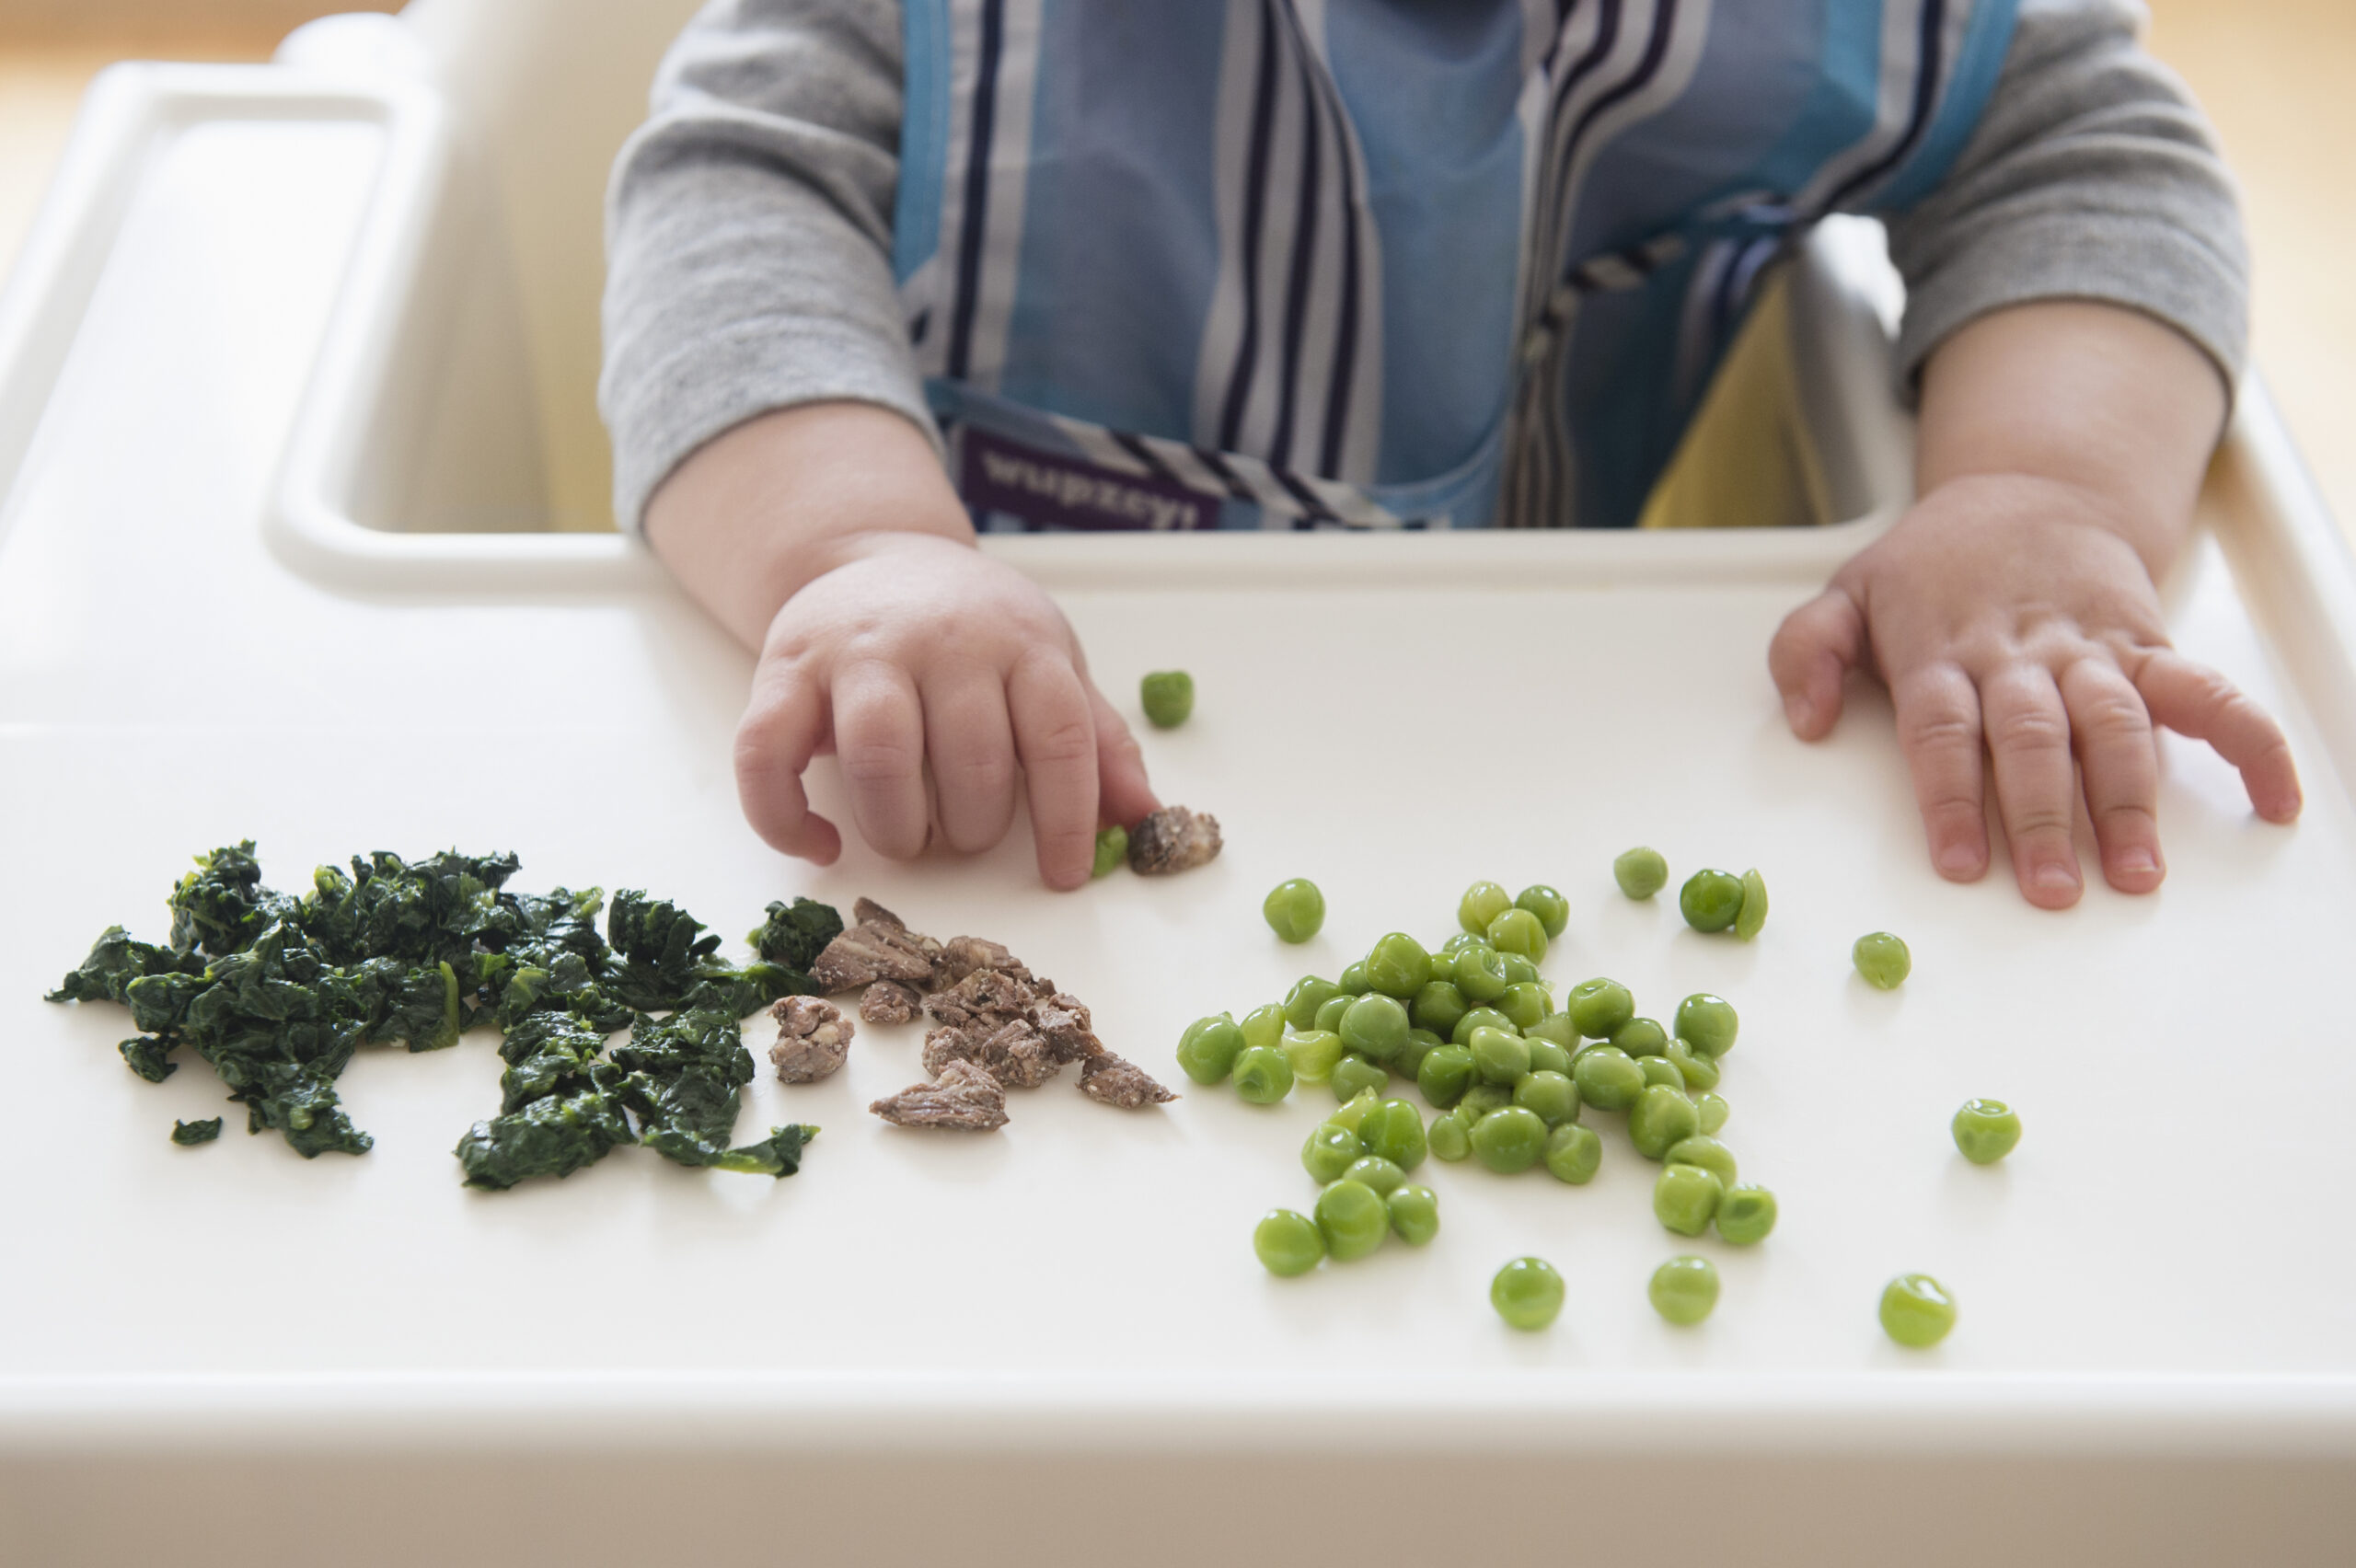 Baby-led weaning doesn’t mean babies gain less weight